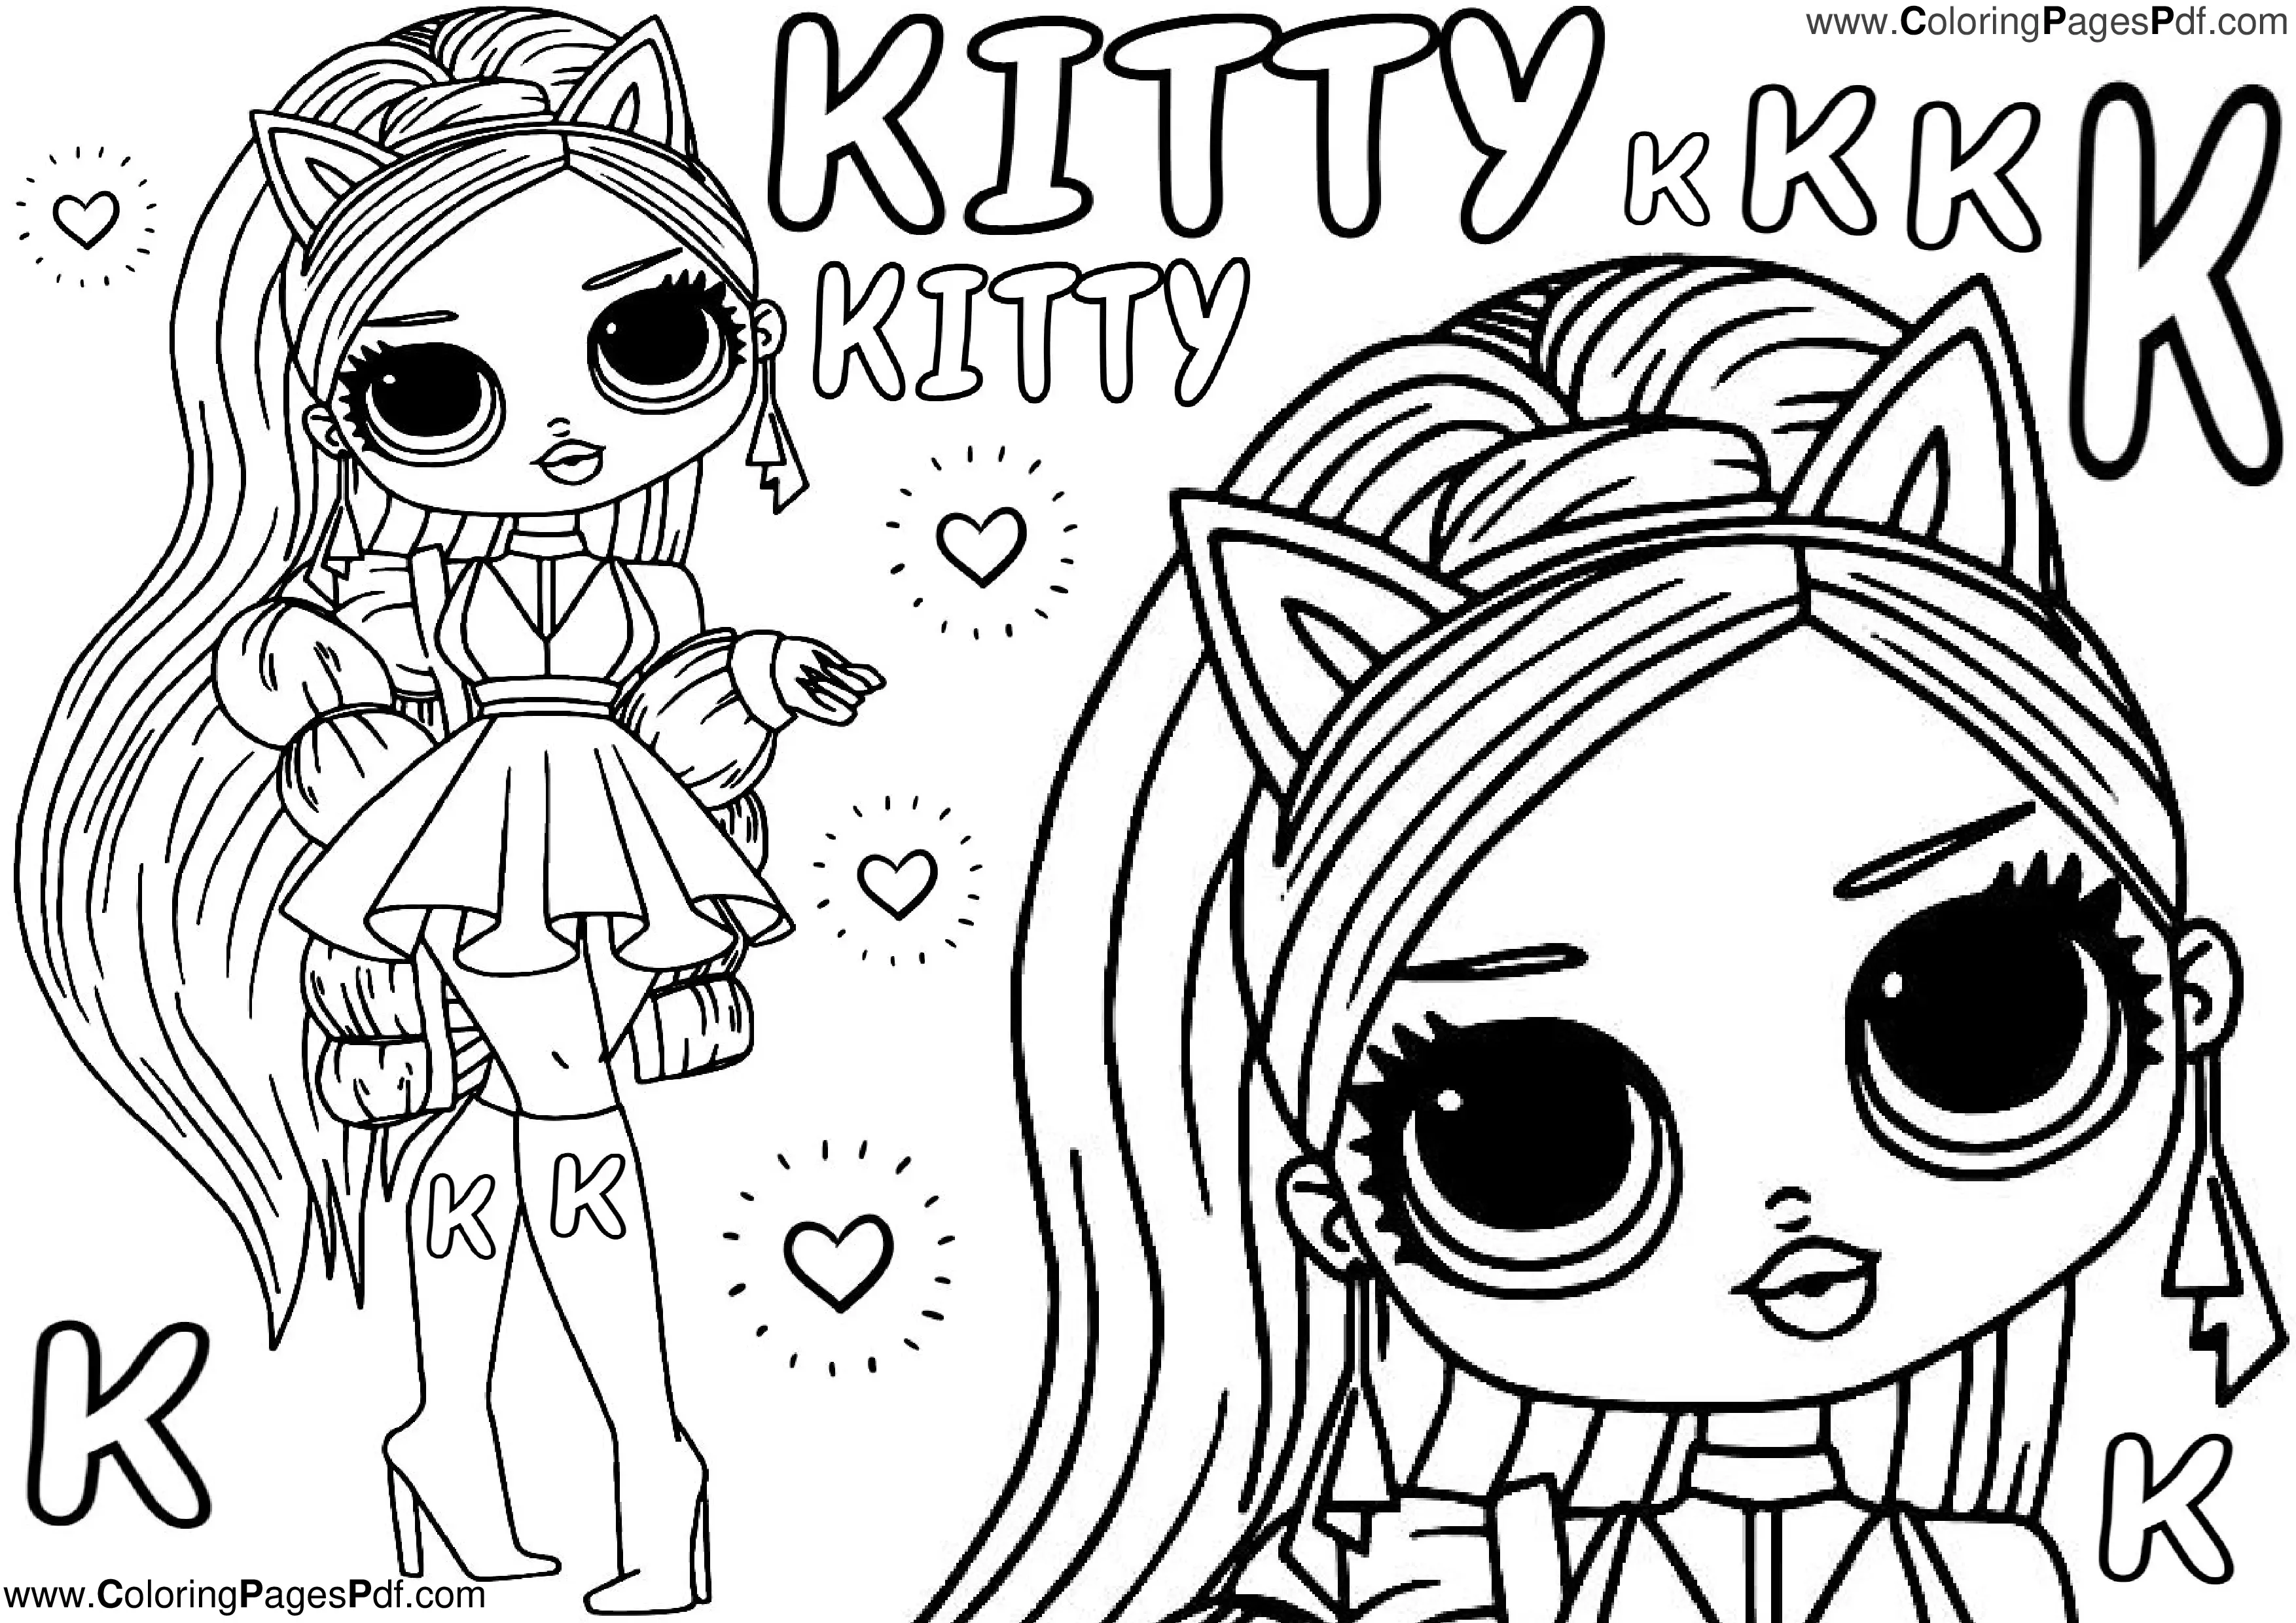 Lol omg coloring pages kitty k